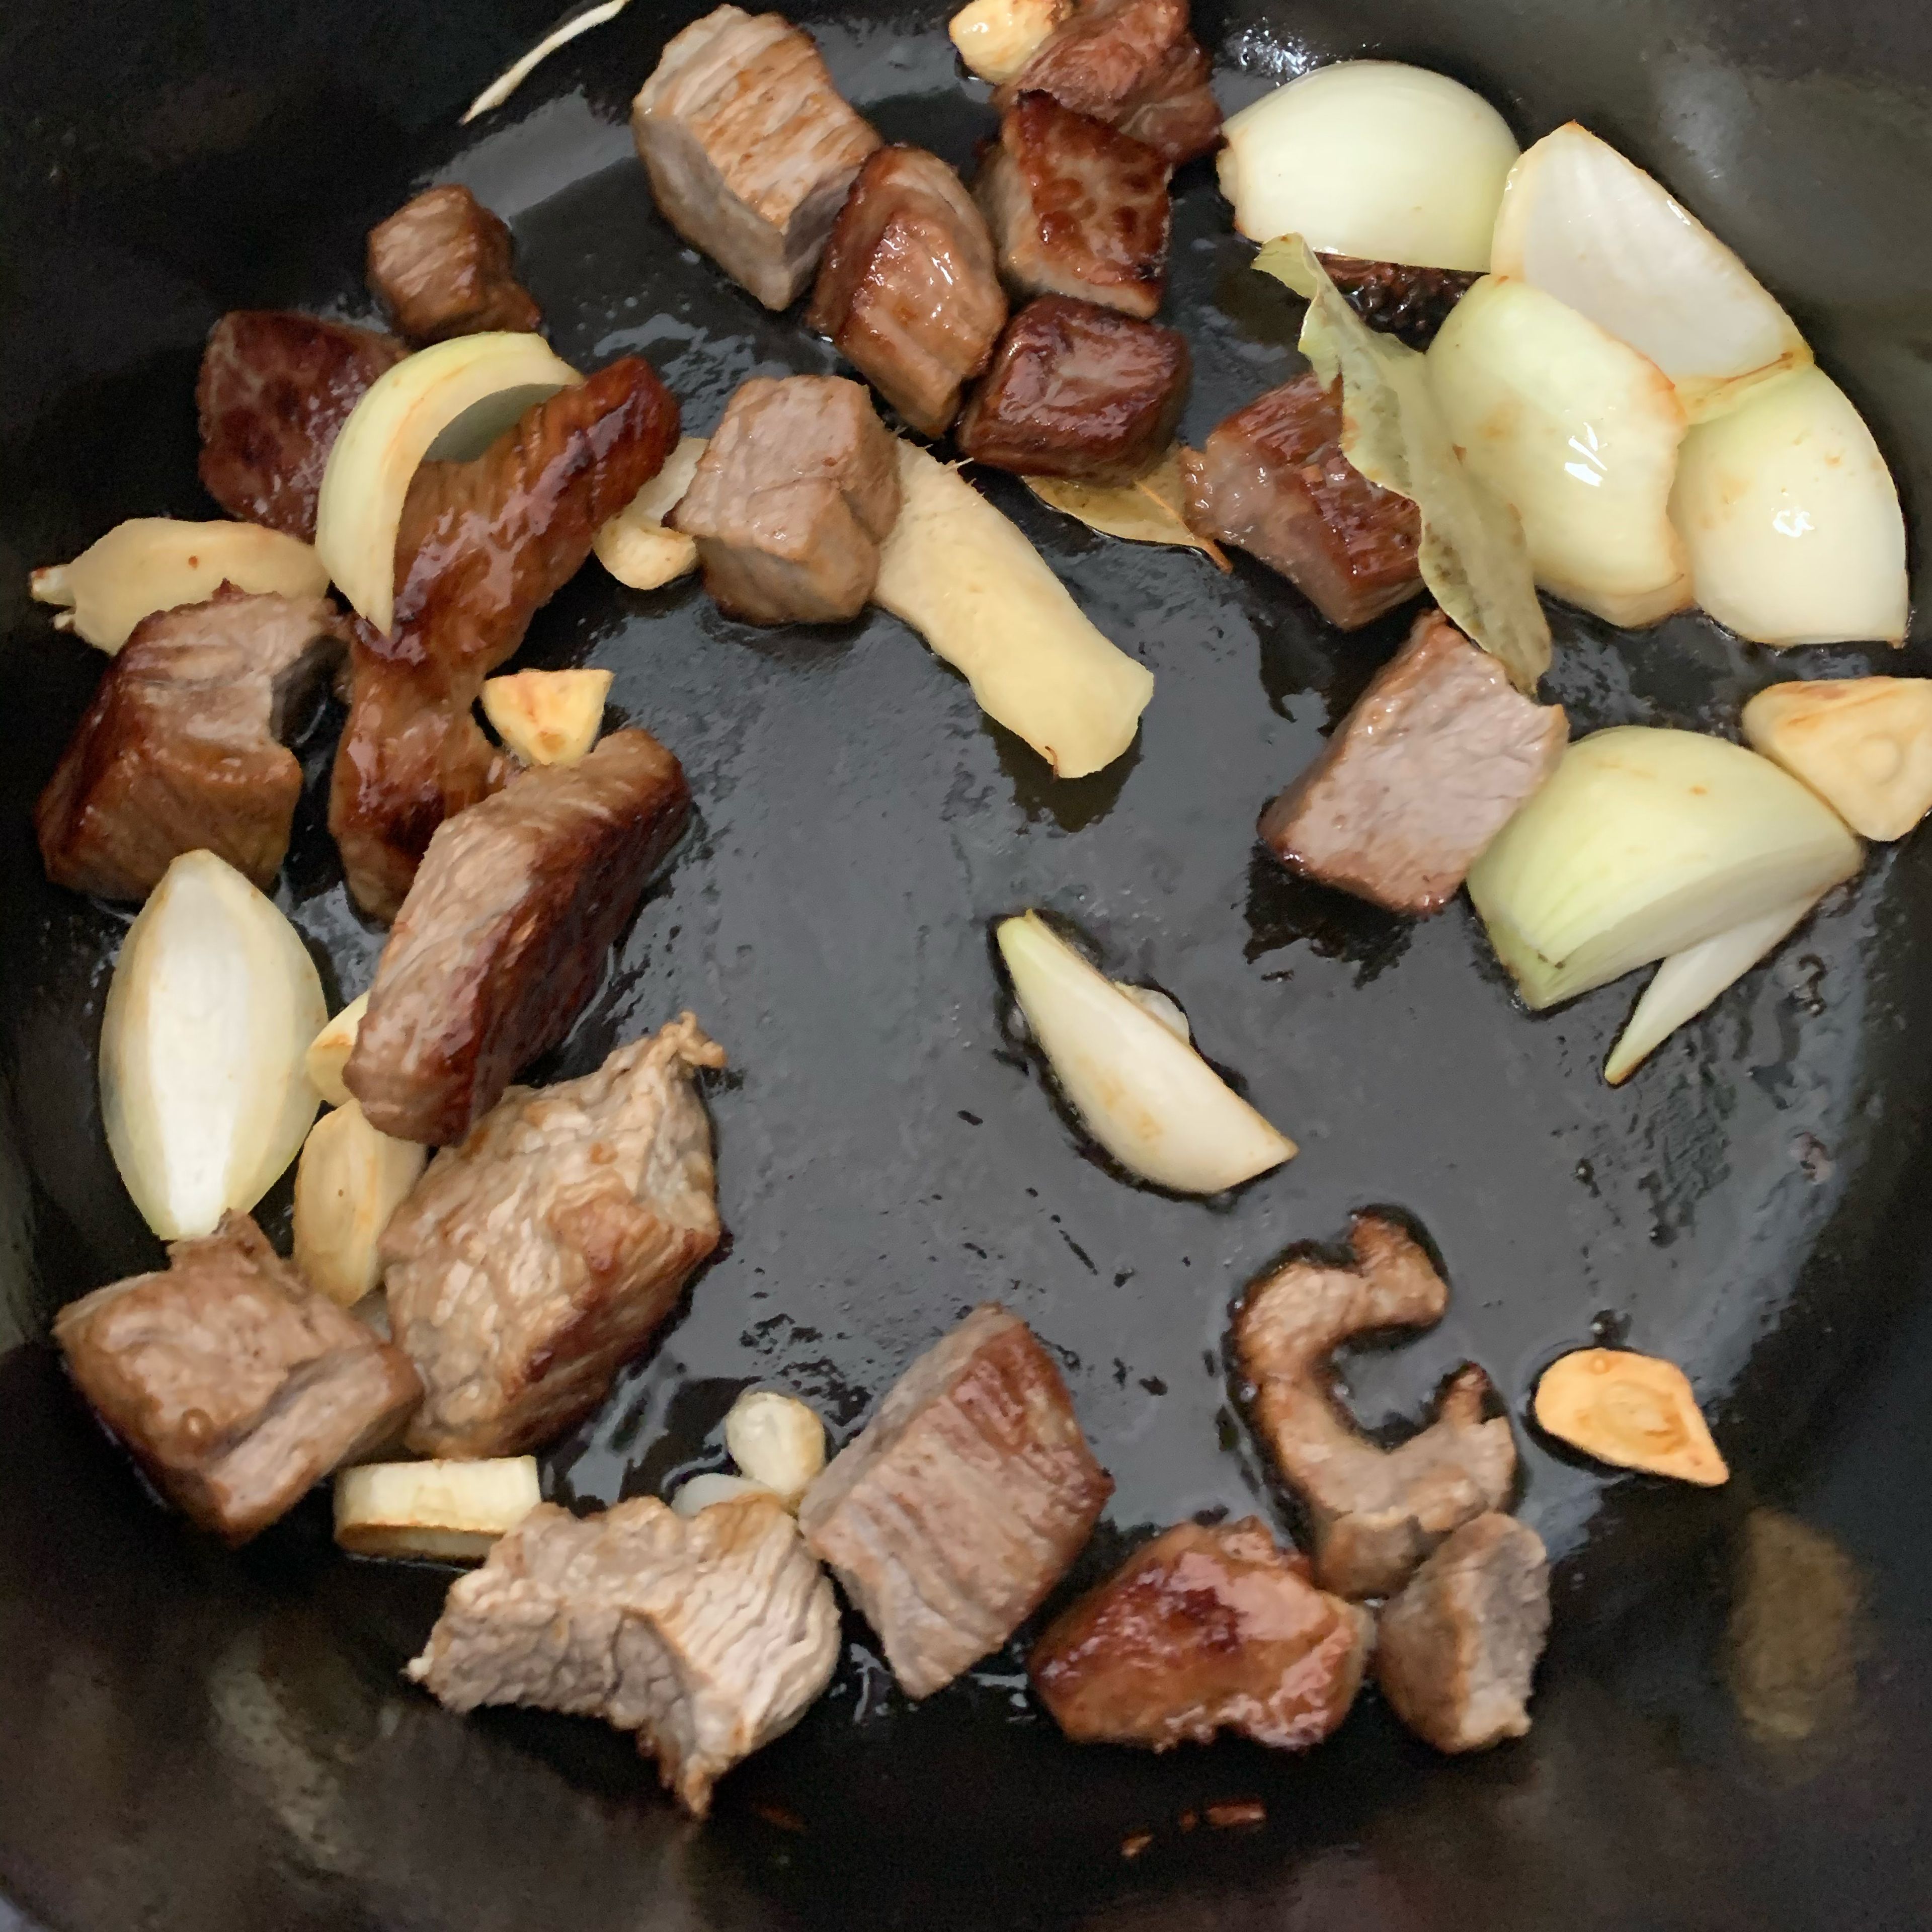 In cast iron pot, add vegetable oil. Add rock sugar, heat over medium-low heat, until the sugar melts. Then add beef, stir so the beef is coated. Then add onion, star anise, bay leaves, dried chilli, garlic and 3 slices ginger. Stir fry for approx 2 min..